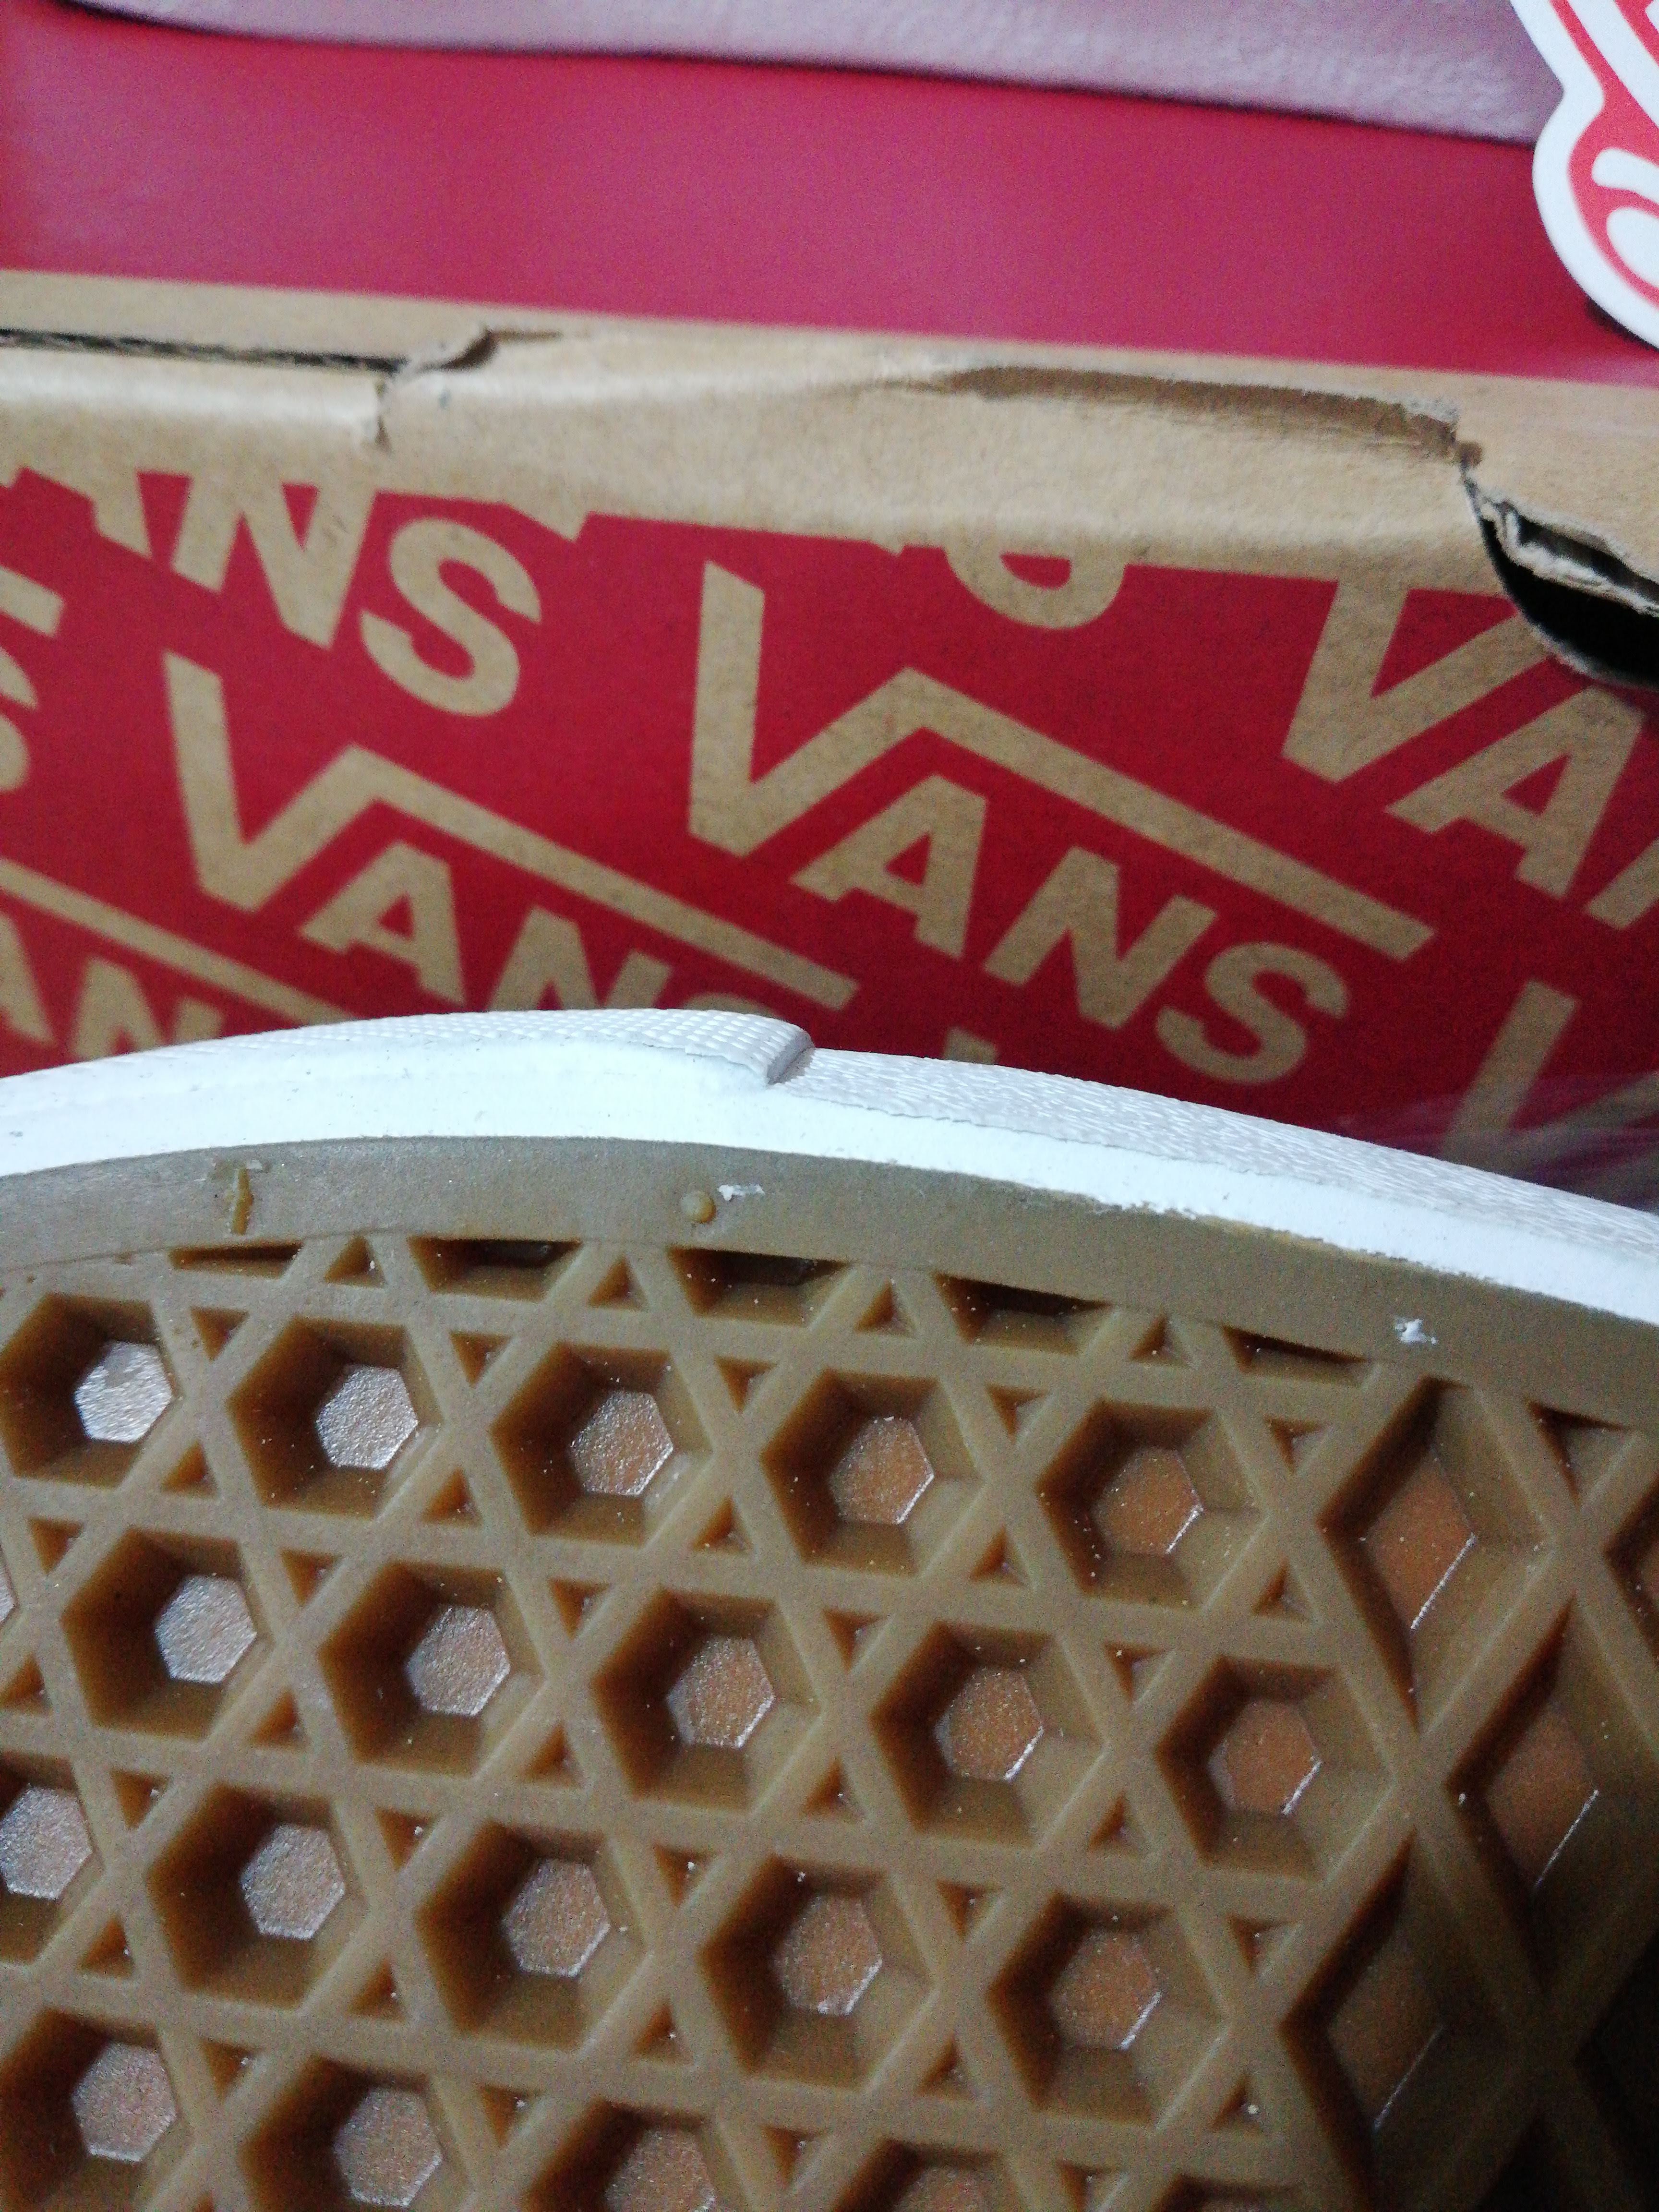 How to check if your Vans shoes is 